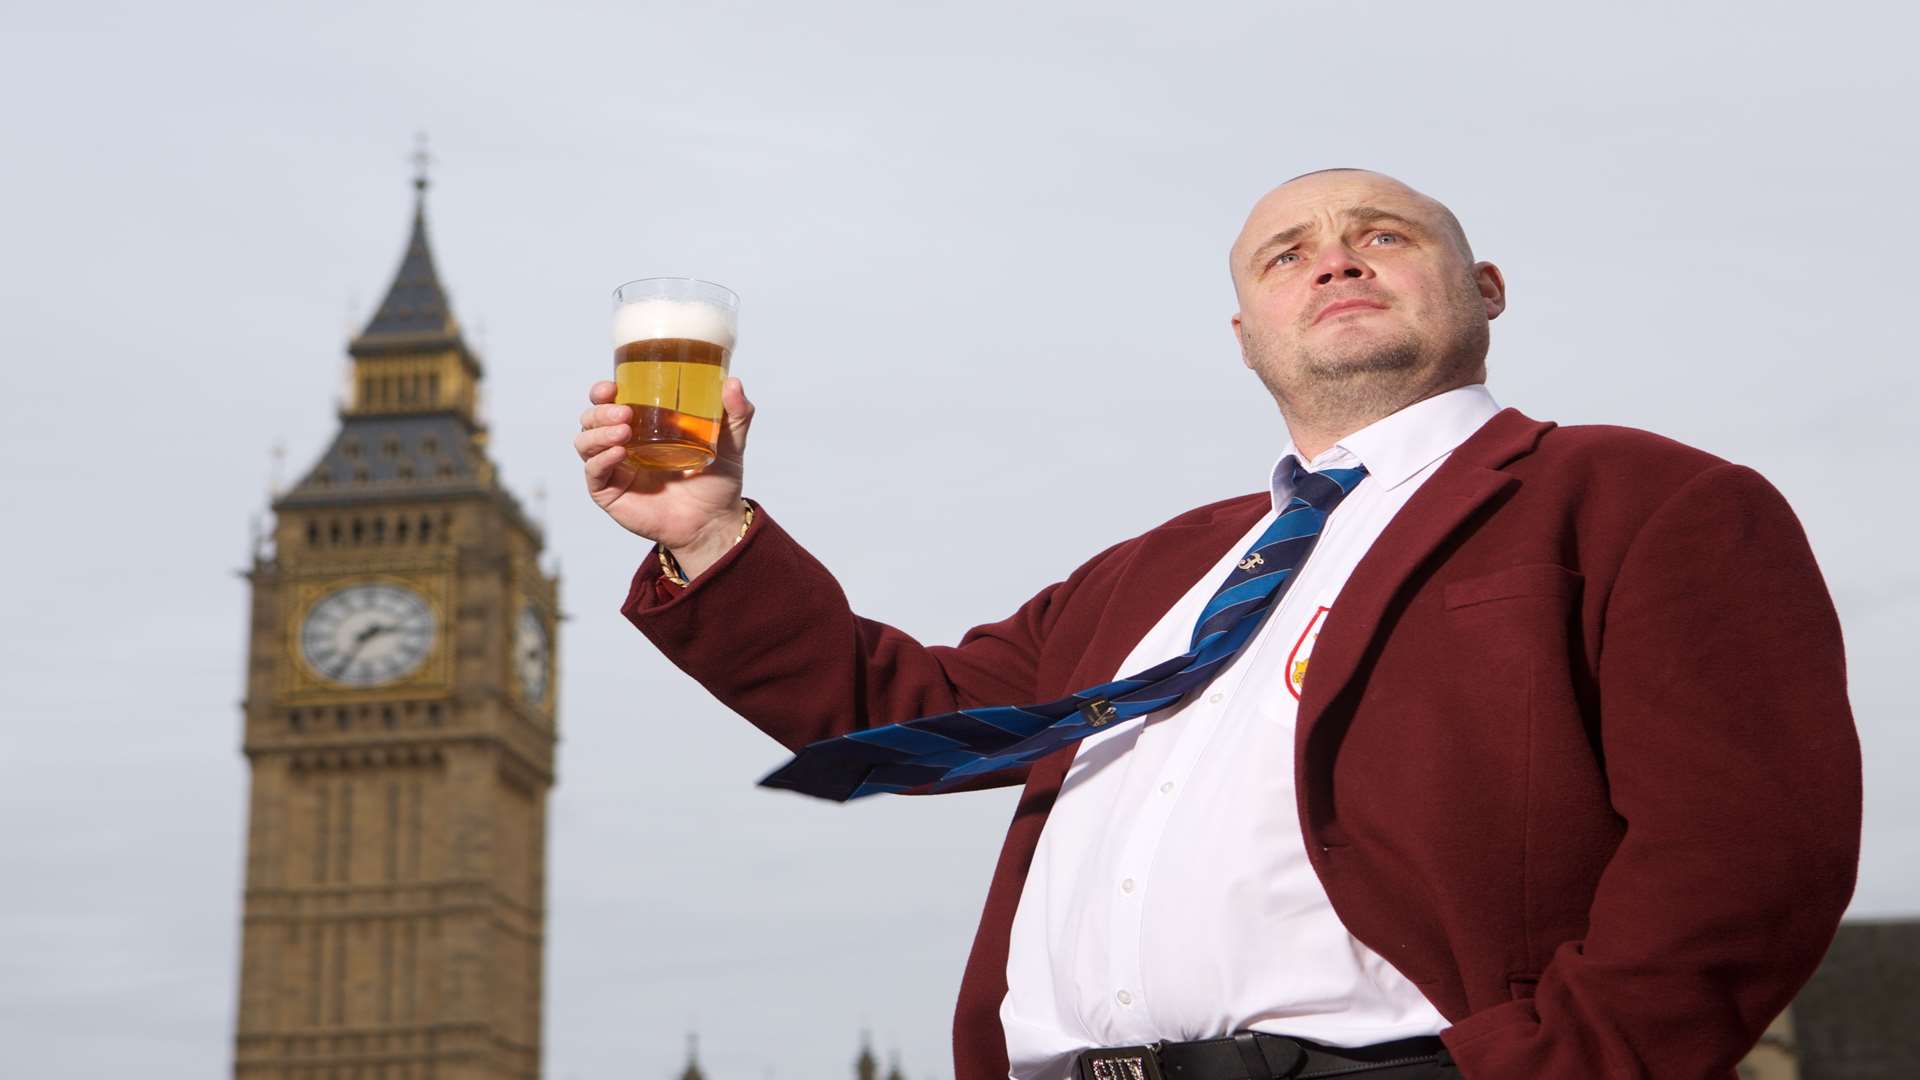 Al Murray will contest the seat in South Thanet